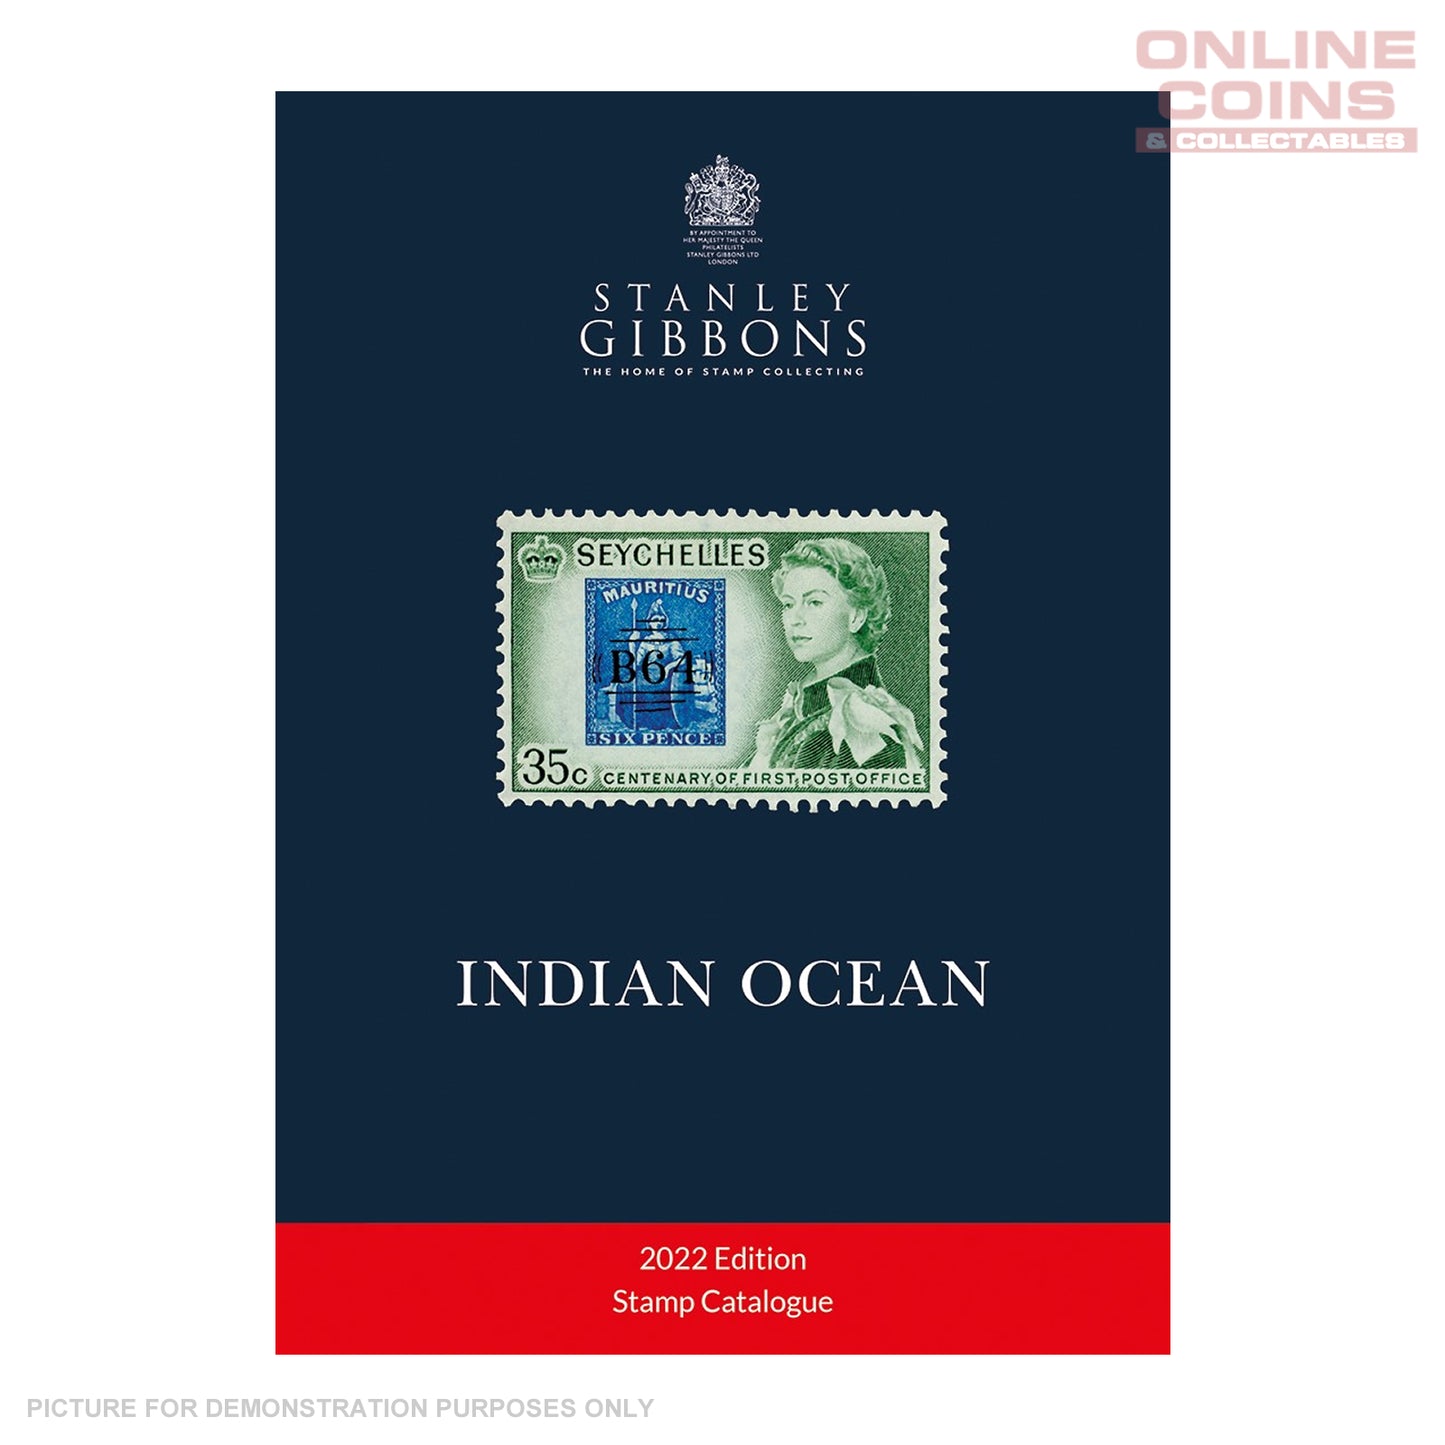 Stanley Gibbons Indian Ocean Stamp Catalogue 4th Edition Soft Cover Book